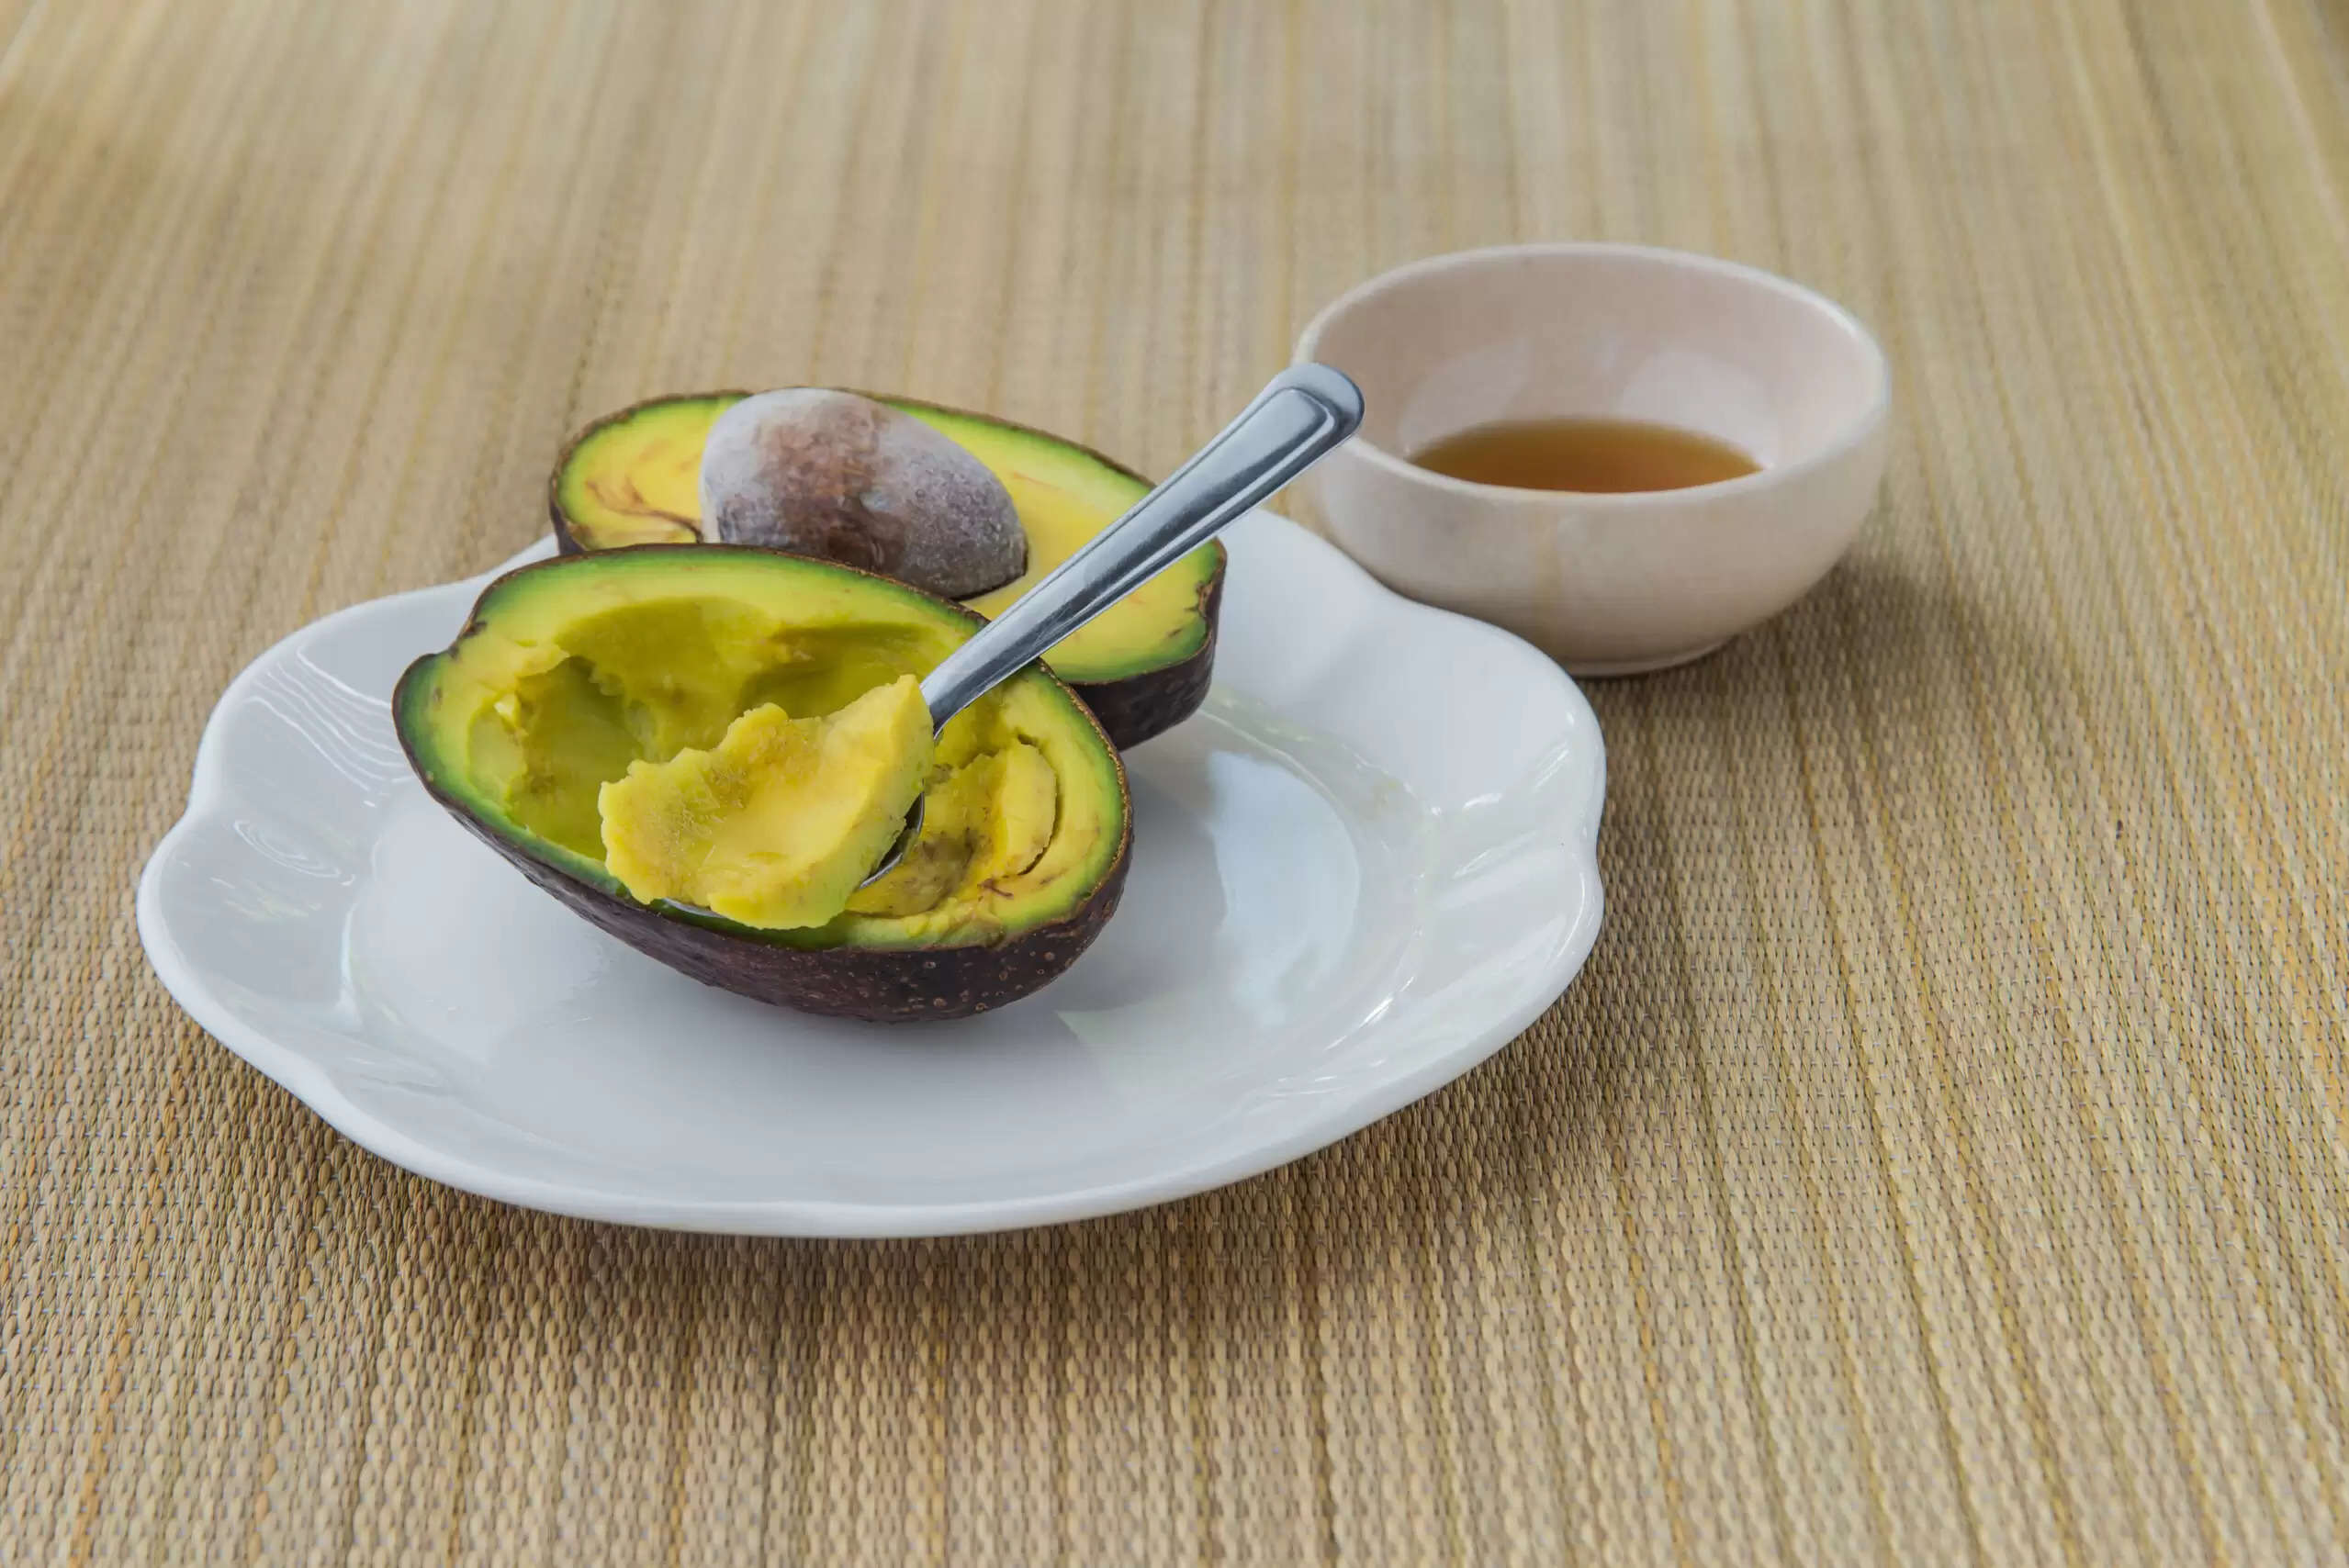 Avocados: Everything You Need To Know About This Versatile Fruit